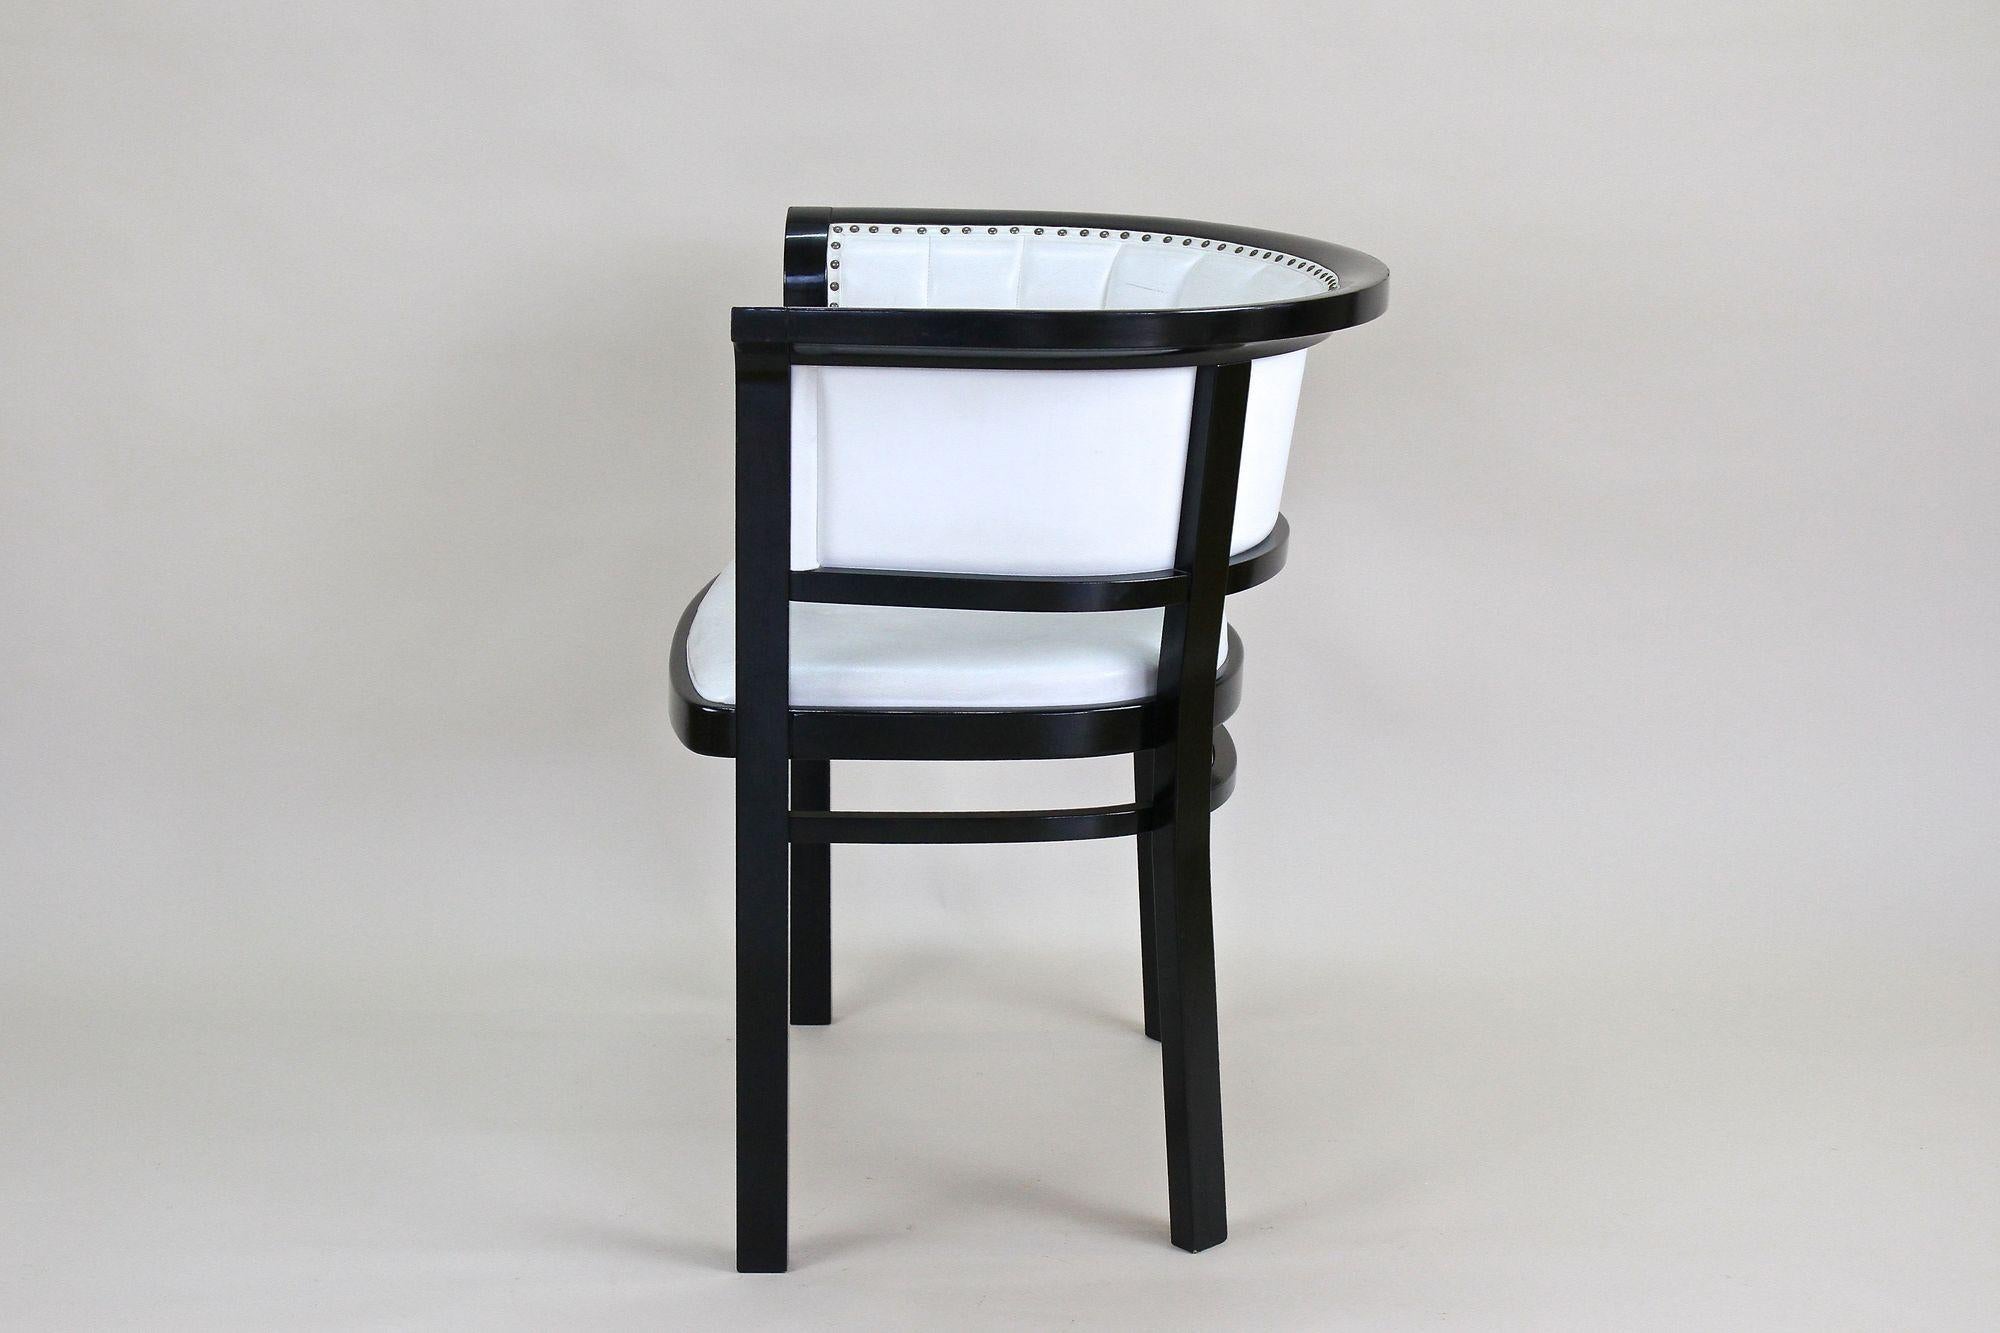 Black Thonet Armchair with White Leather, Design Marcel Kammerer, at circa 1980 For Sale 2